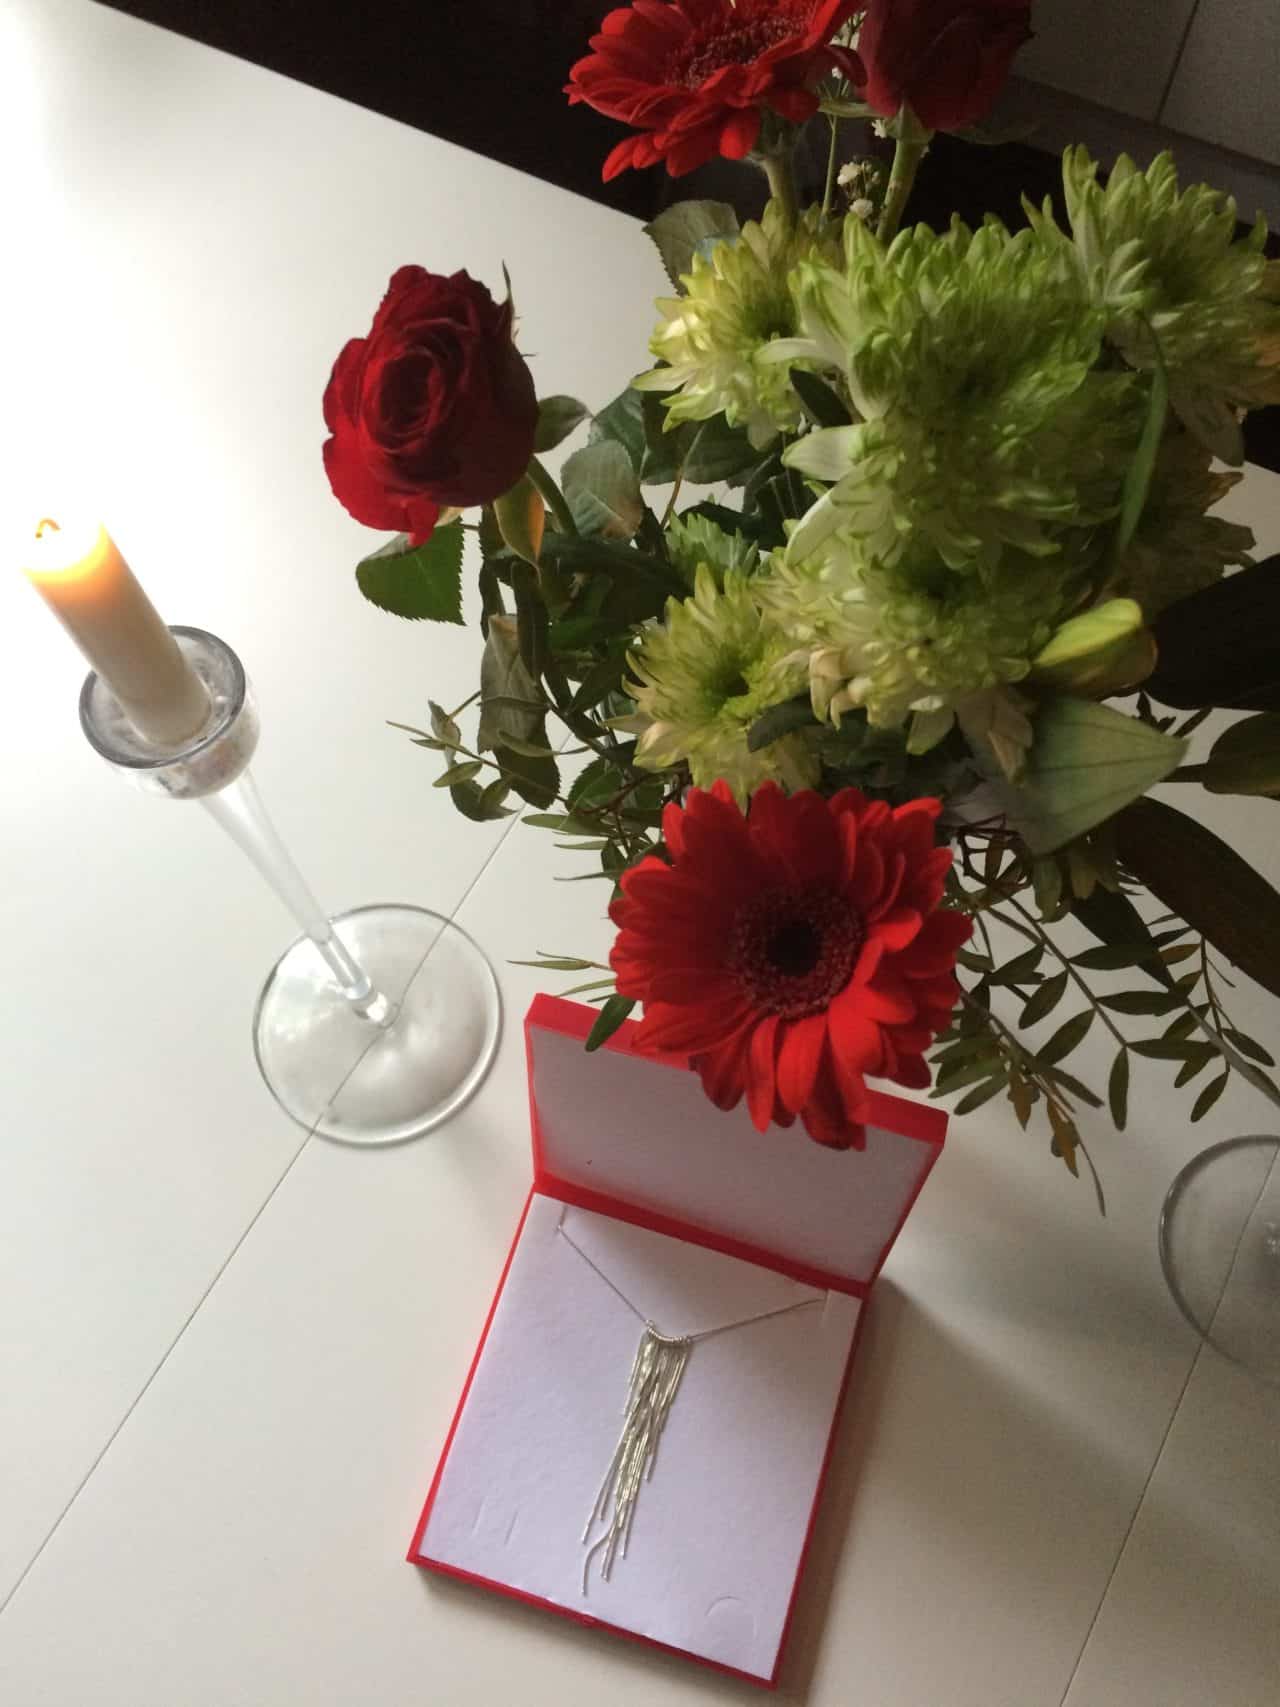 Jewelry Gift With Flowers And A Lit Candle